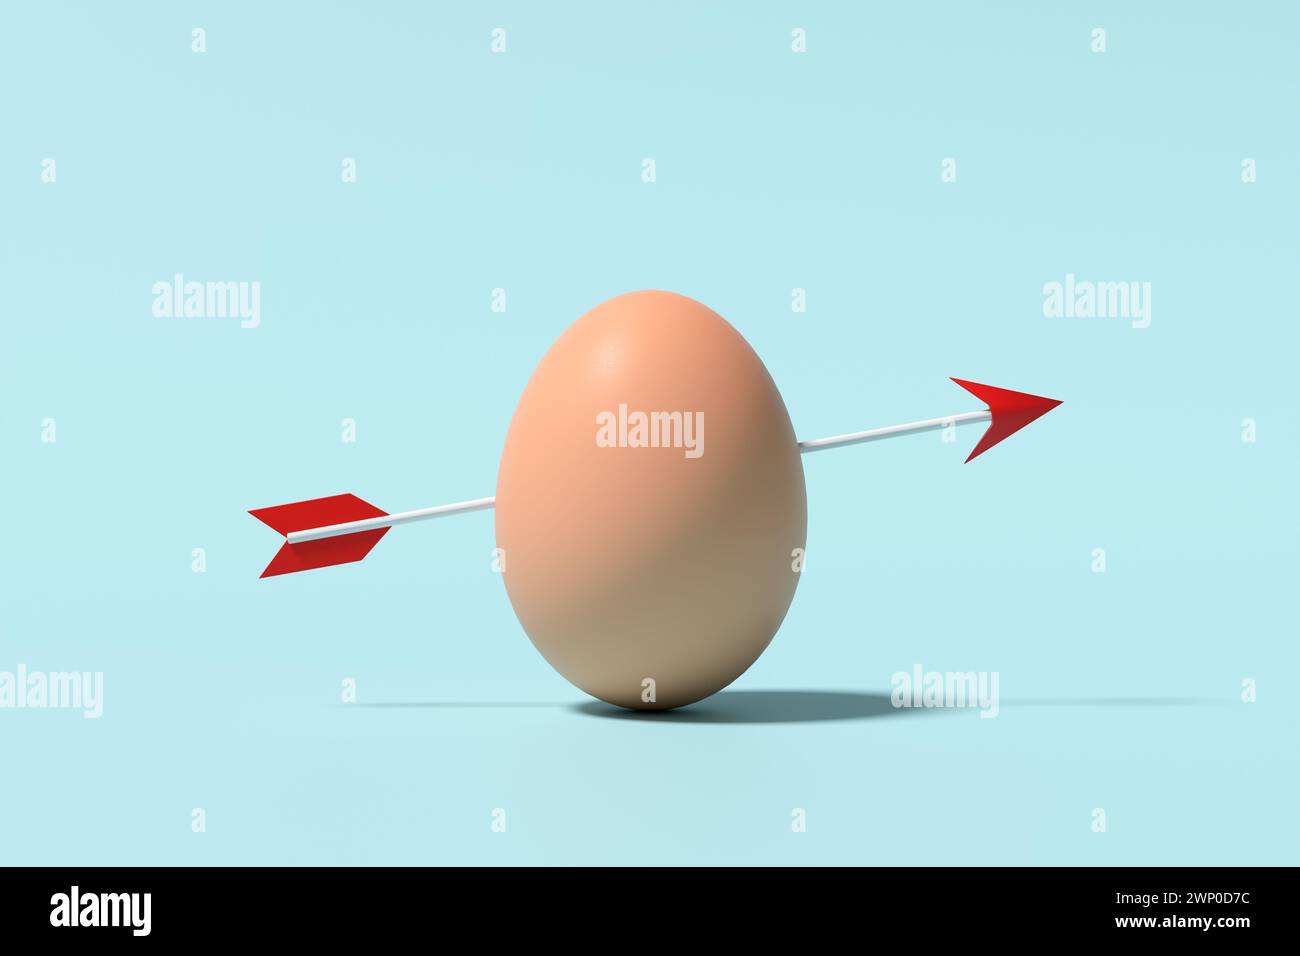 Egg hit by an arrow on blue background. Fragility, precision, vulnerability and target goal achievement concepts. 3D rendering. Stock Photo